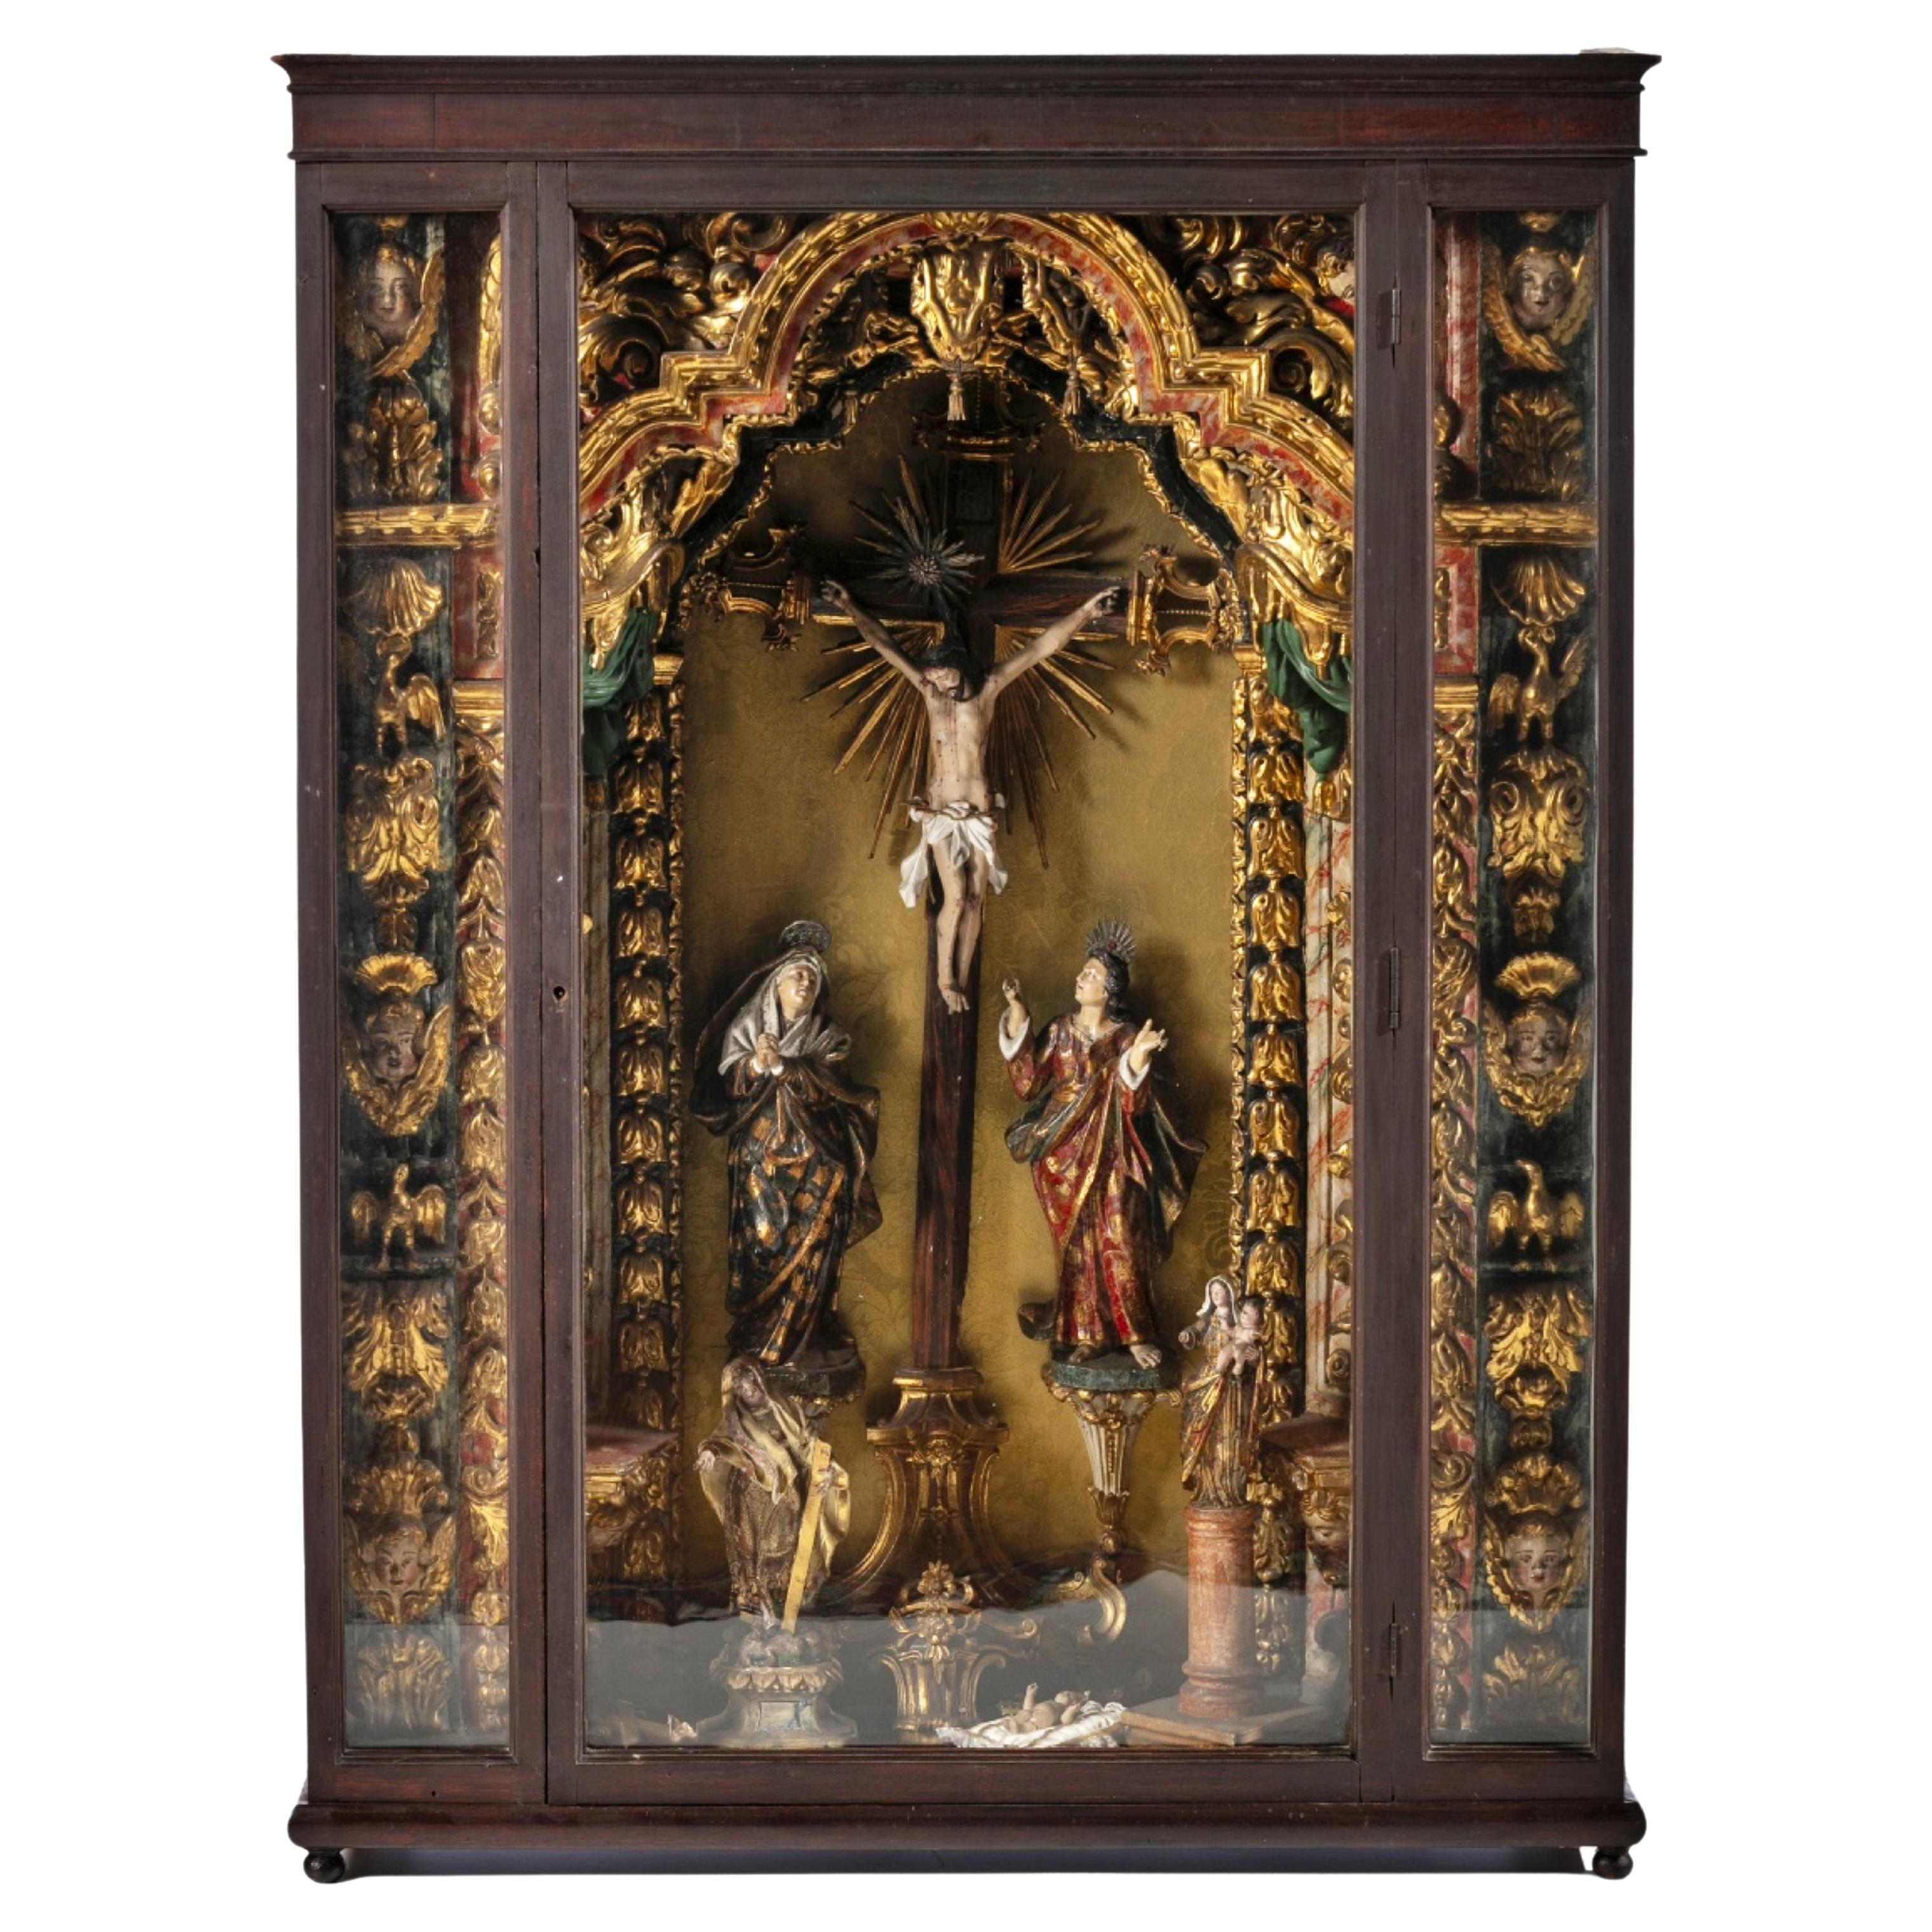 IMPORTANT PORTUGUESE ORATORY WITH CALVARY 17th Century